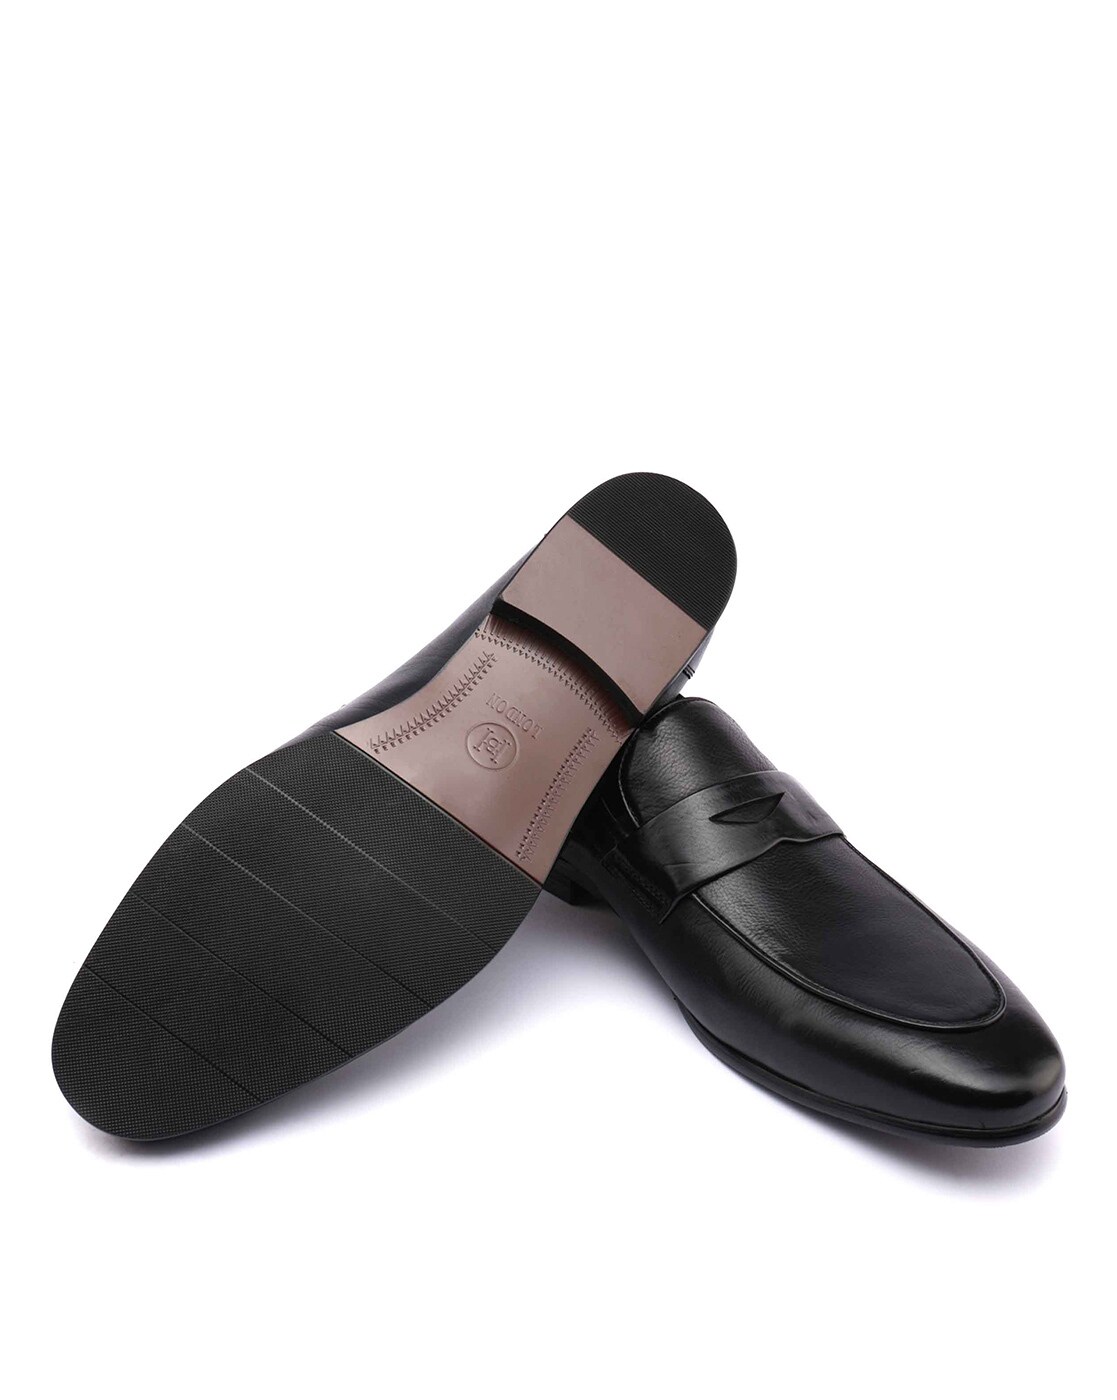 black formal shoes without heels